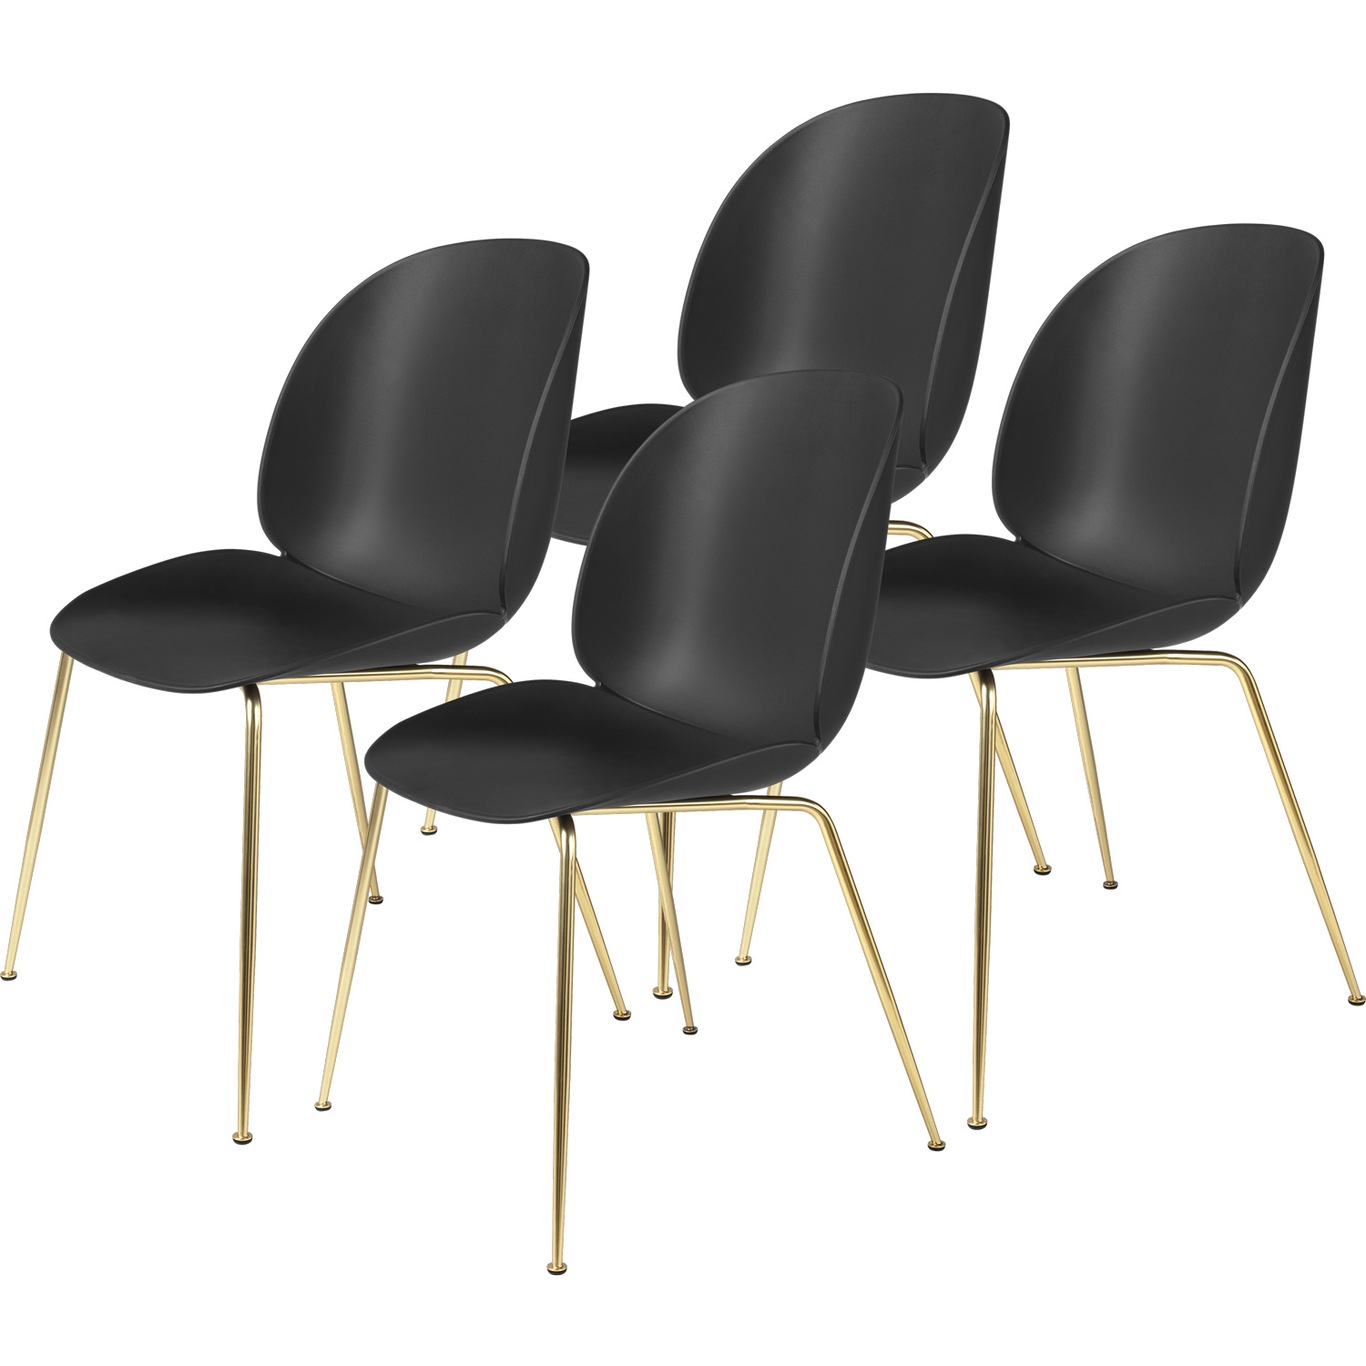 Beetle Chair Un-upholstered 4-pack Conic Base Brass, Black